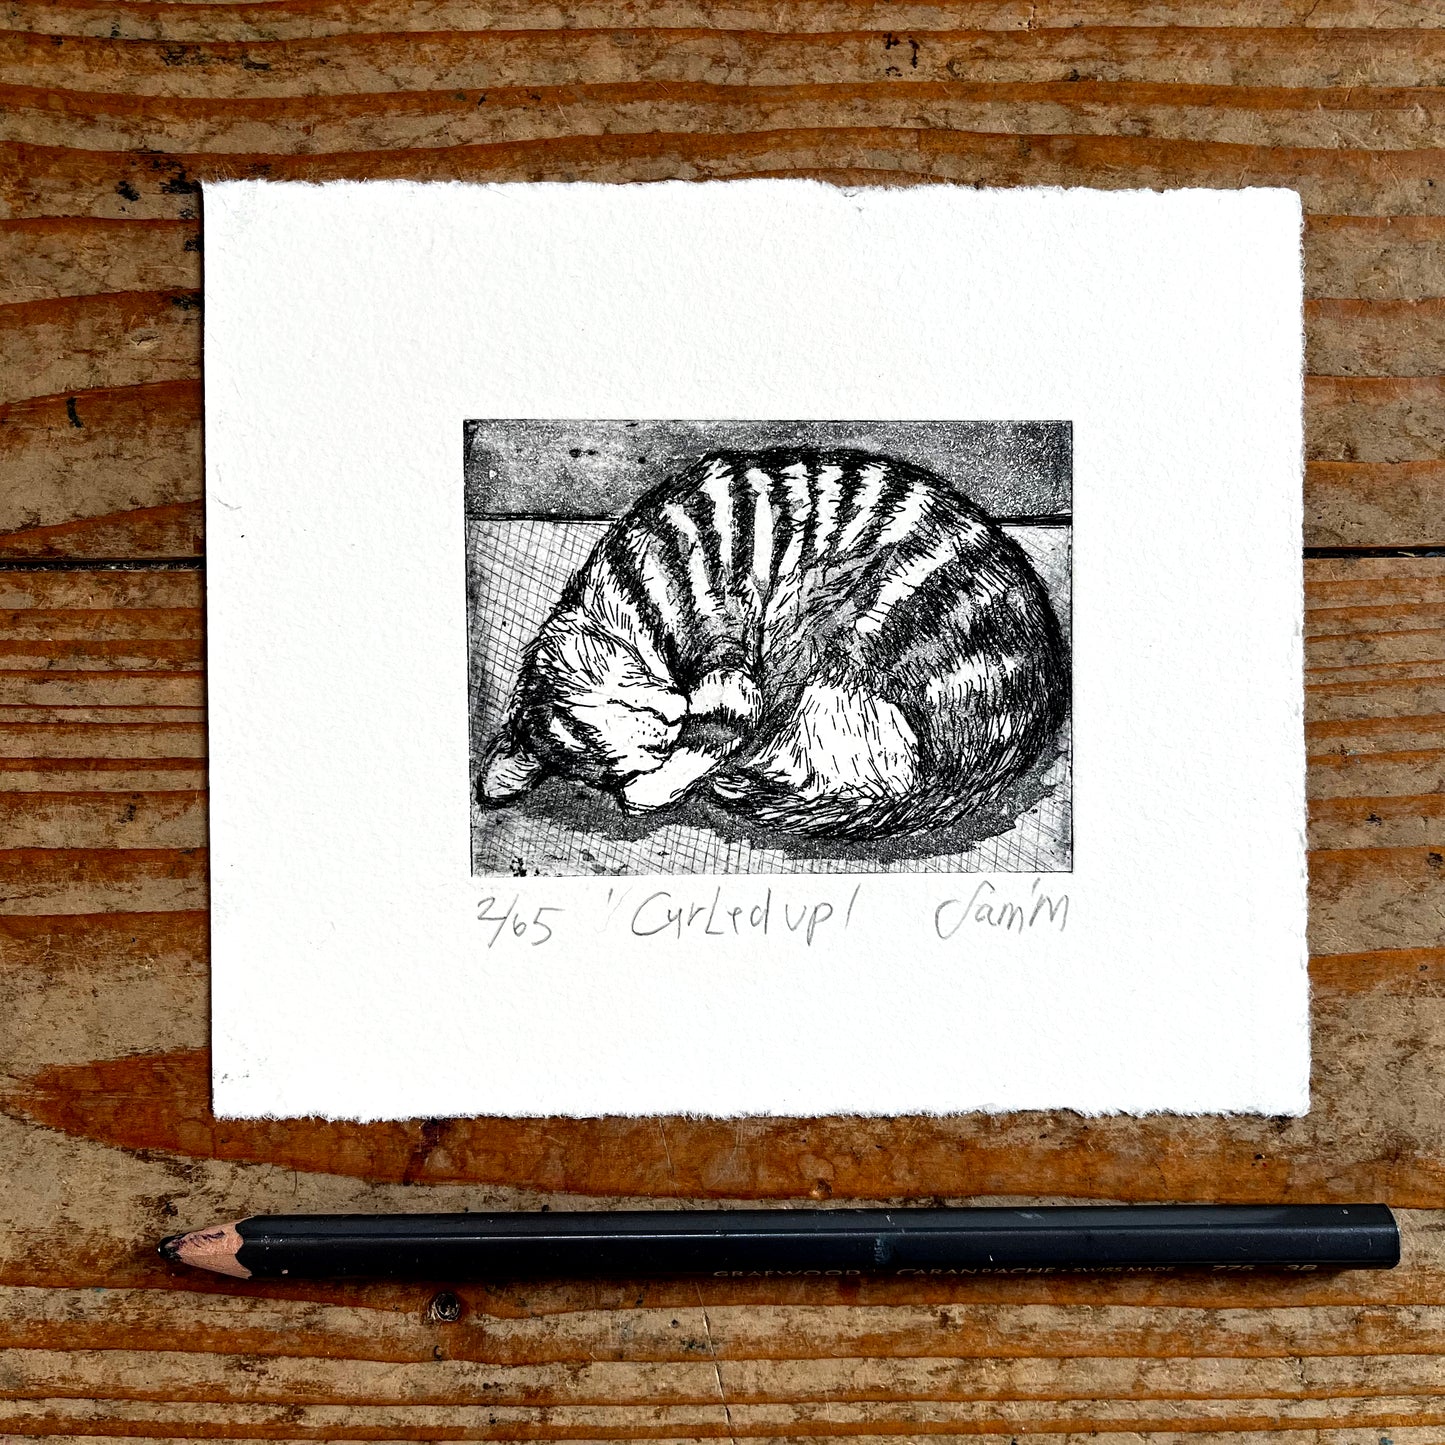 Advent treat Day 1 - 'Curled up'